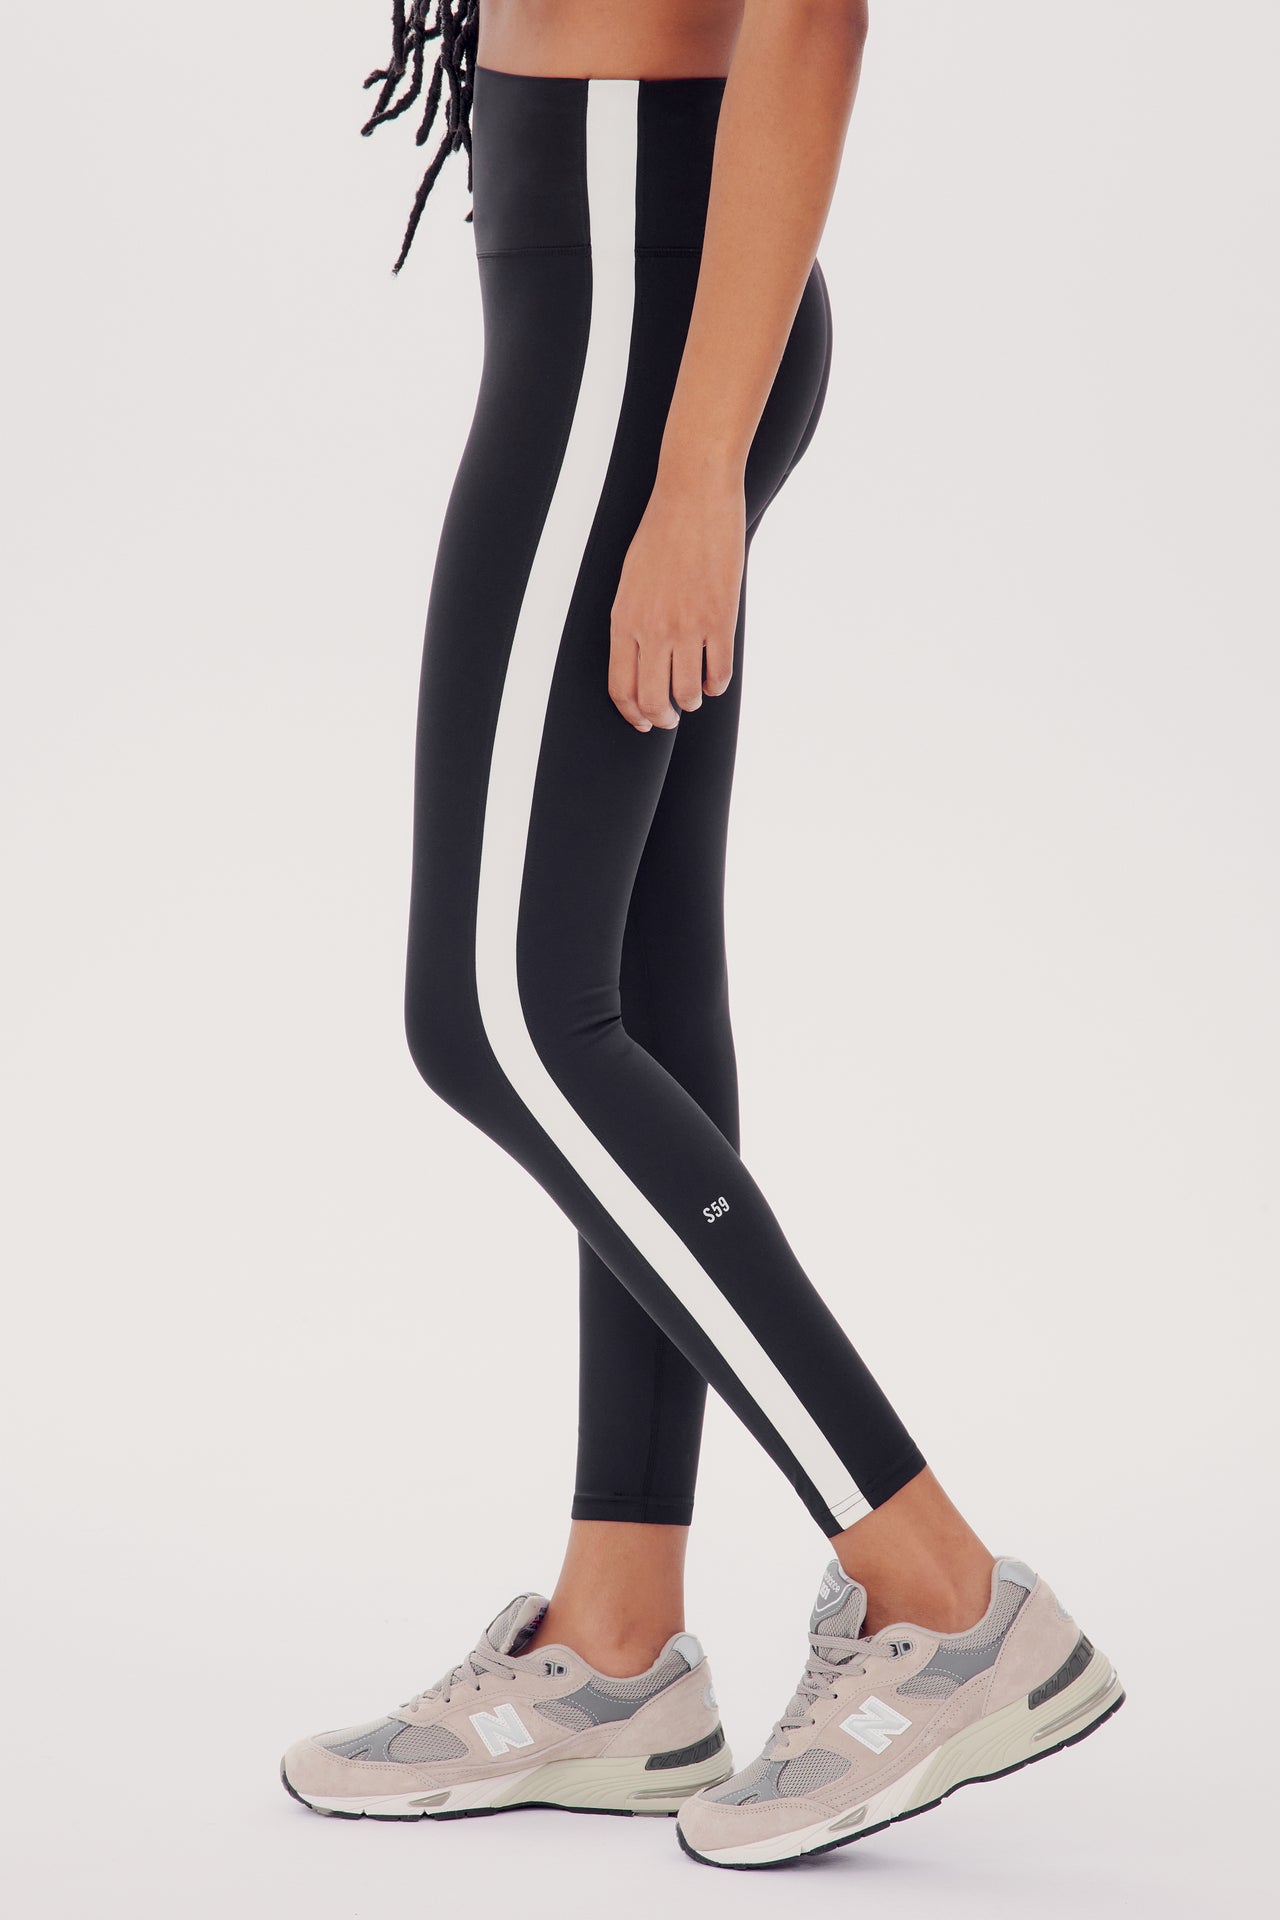 Woman wearing SPLITS59 Clare High Waist Rigor 7/8 leggings in Black/White with gray sneakers, standing against a white background, side view focusing on the legs.